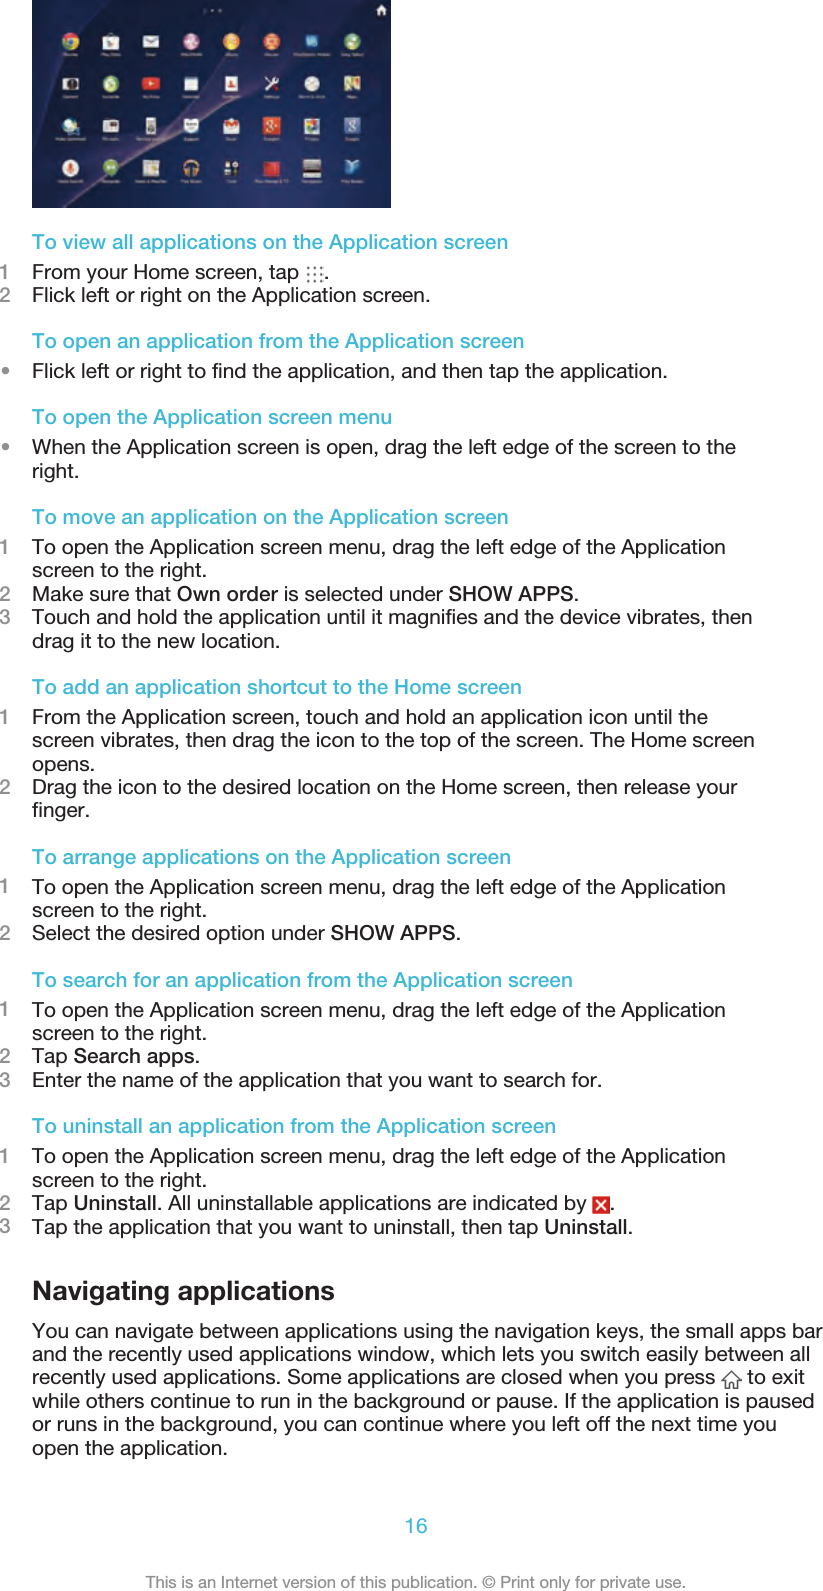 To view all applications on the Application screen1From your Home screen, tap  .2Flick left or right on the Application screen.To open an application from the Application screen•Flick left or right to find the application, and then tap the application.To open the Application screen menu•When the Application screen is open, drag the left edge of the screen to theright.To move an application on the Application screen1To open the Application screen menu, drag the left edge of the Applicationscreen to the right.2Make sure that Own order is selected under SHOW APPS.3Touch and hold the application until it magnifies and the device vibrates, thendrag it to the new location.To add an application shortcut to the Home screen1From the Application screen, touch and hold an application icon until thescreen vibrates, then drag the icon to the top of the screen. The Home screenopens.2Drag the icon to the desired location on the Home screen, then release yourfinger.To arrange applications on the Application screen1To open the Application screen menu, drag the left edge of the Applicationscreen to the right.2Select the desired option under SHOW APPS.To search for an application from the Application screen1To open the Application screen menu, drag the left edge of the Applicationscreen to the right.2Tap Search apps.3Enter the name of the application that you want to search for.To uninstall an application from the Application screen1To open the Application screen menu, drag the left edge of the Applicationscreen to the right.2Tap Uninstall. All uninstallable applications are indicated by  .3Tap the application that you want to uninstall, then tap Uninstall.Navigating applicationsYou can navigate between applications using the navigation keys, the small apps barand the recently used applications window, which lets you switch easily between allrecently used applications. Some applications are closed when you press   to exitwhile others continue to run in the background or pause. If the application is pausedor runs in the background, you can continue where you left off the next time youopen the application.16This is an Internet version of this publication. © Print only for private use.